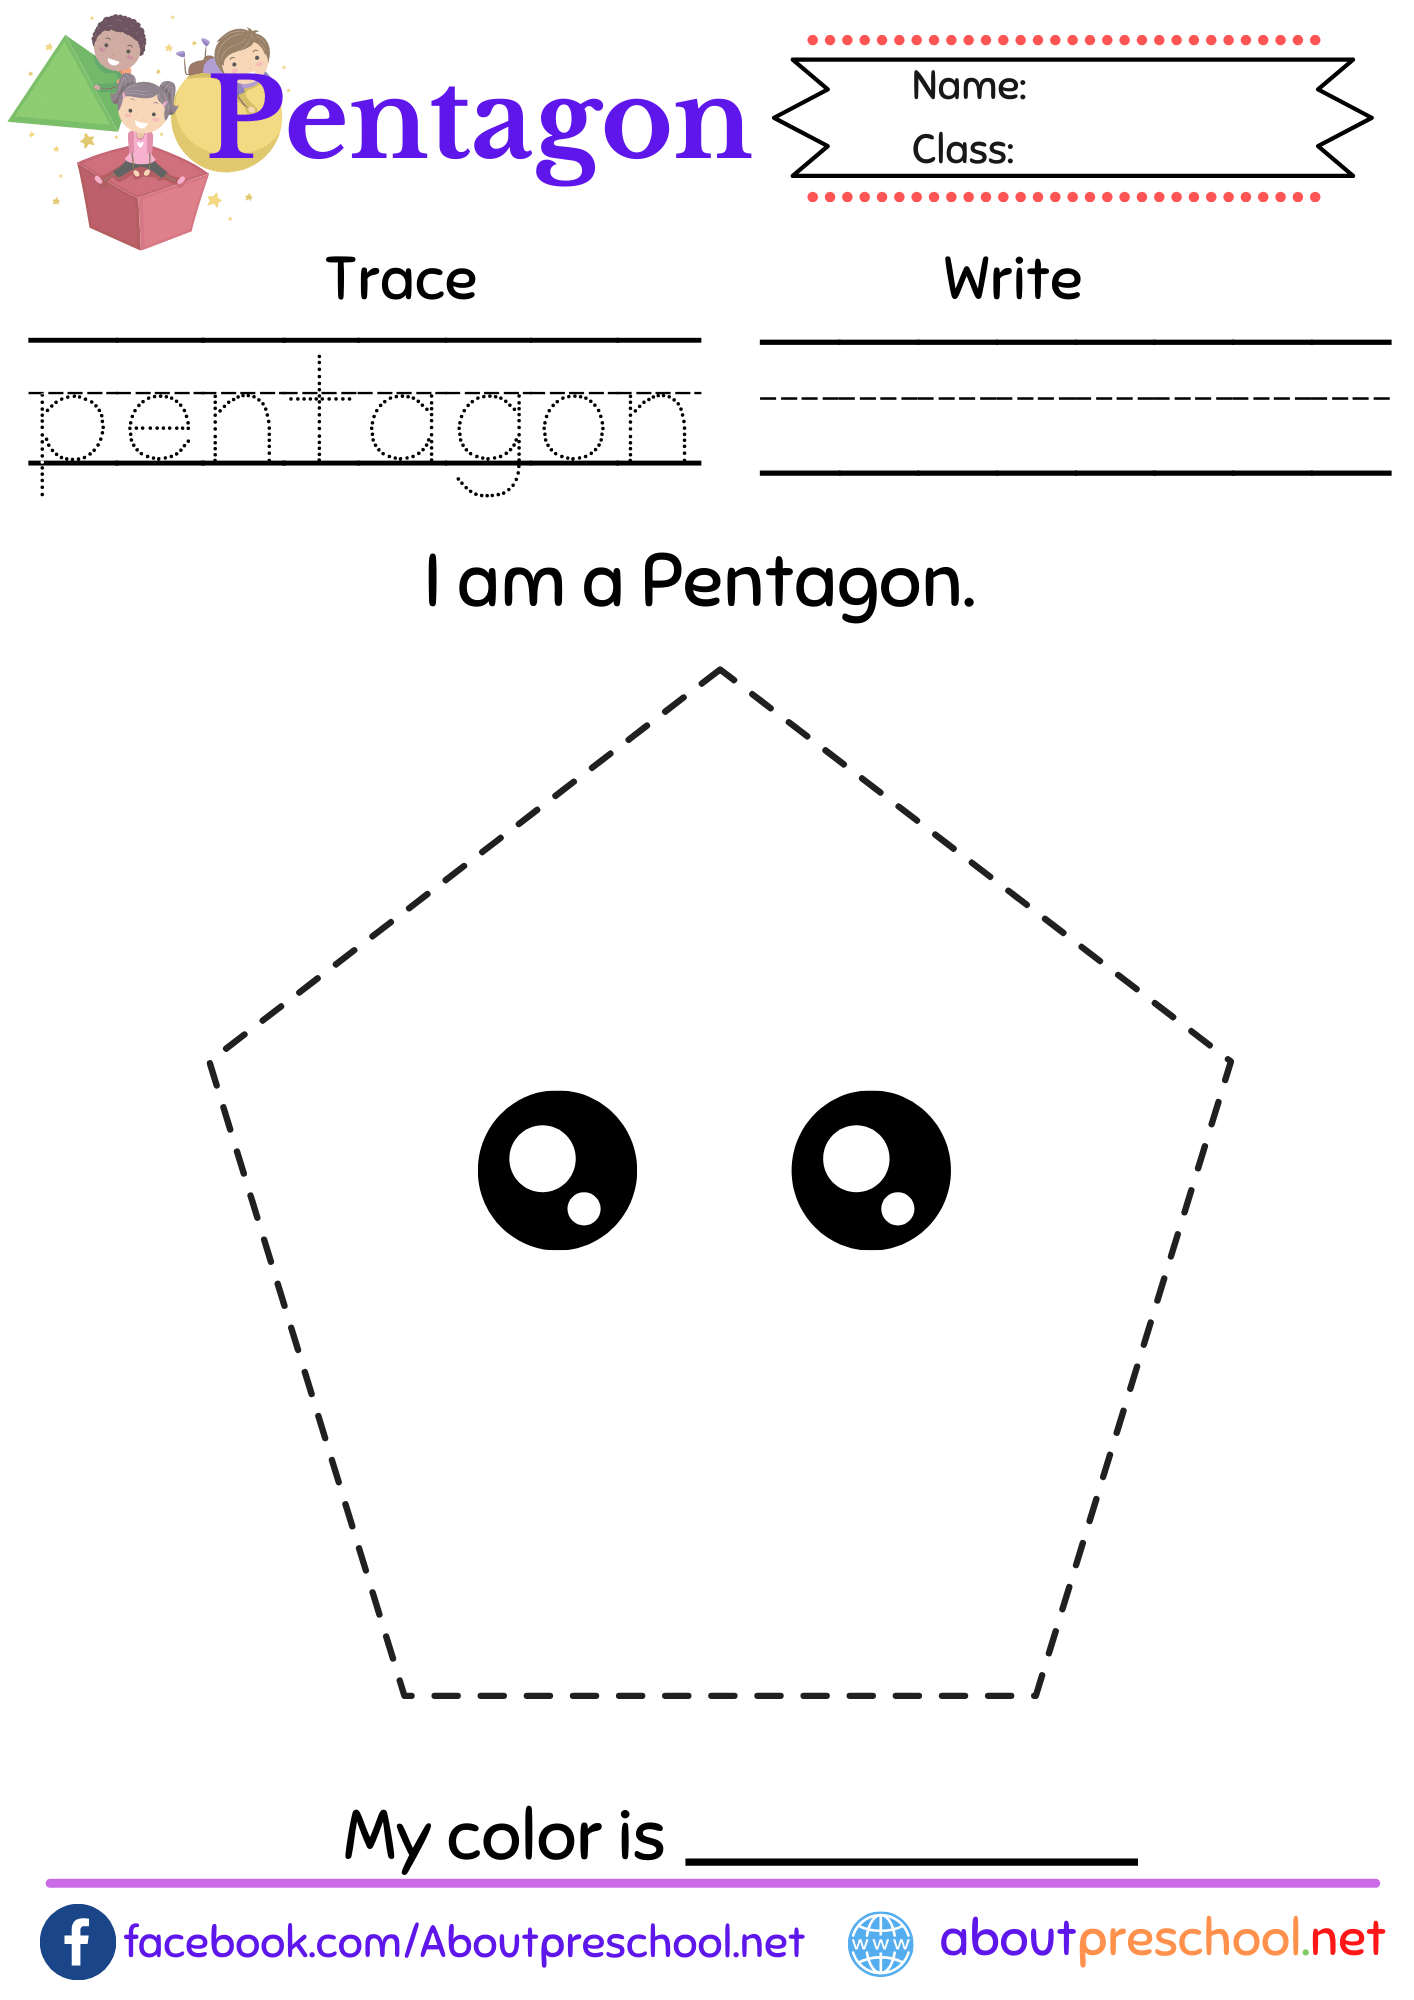 Free Trace and Color the pentagon worksheet - About Preschool